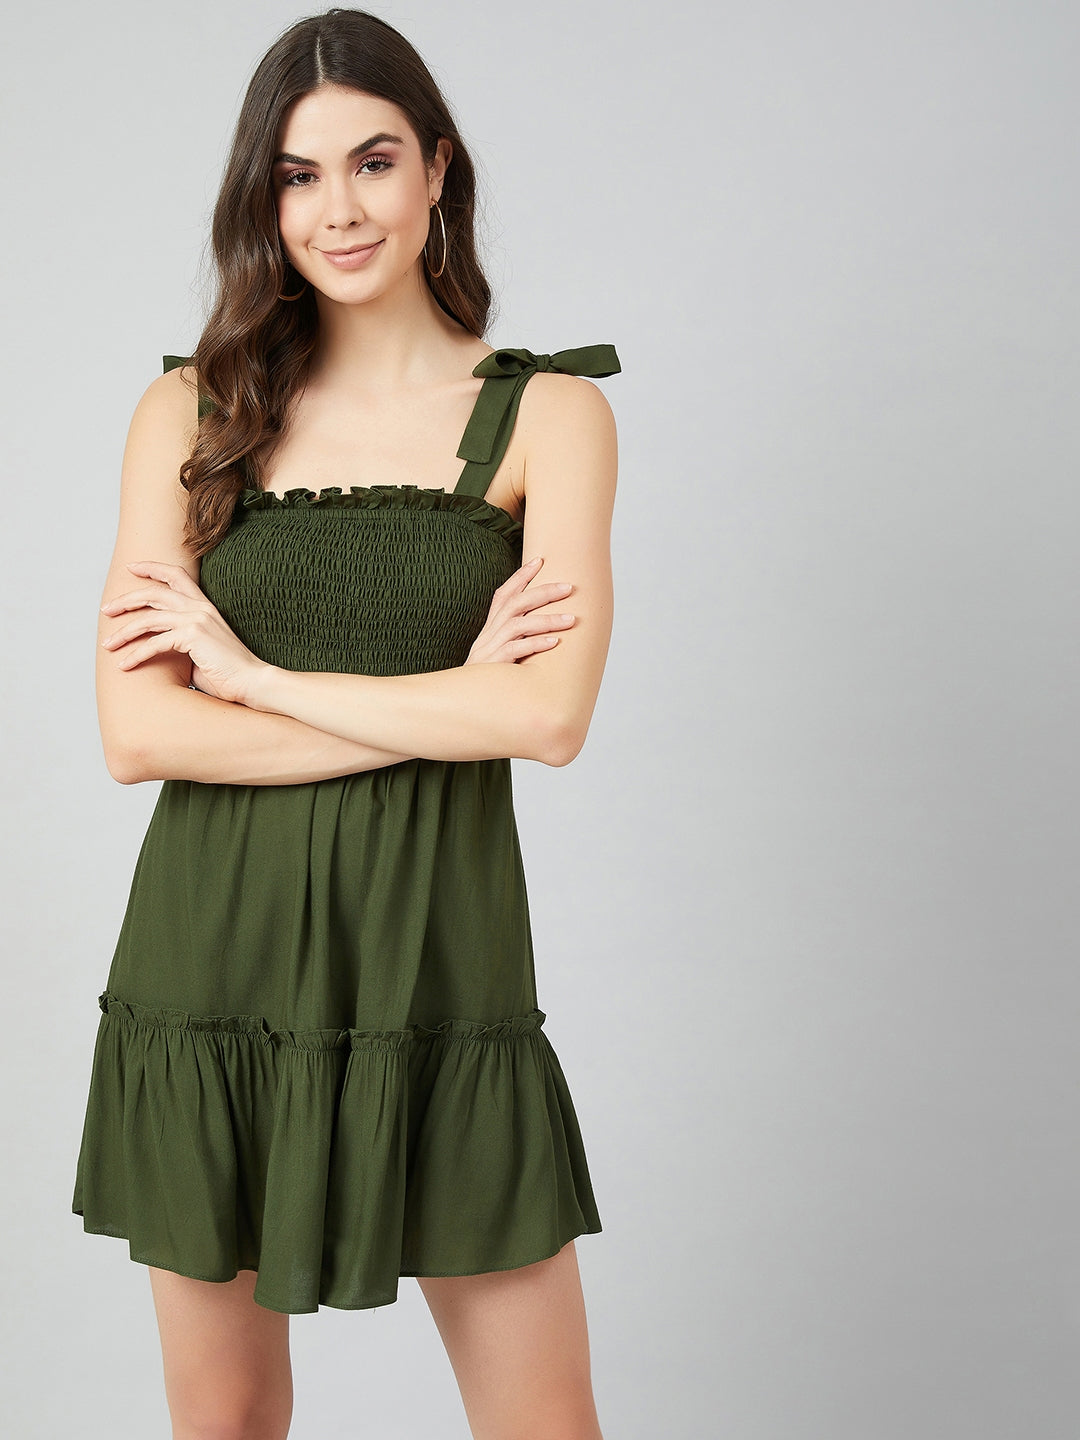 Athena Women Olive Green Solid Fit and Flare Dress - Athena Lifestyle